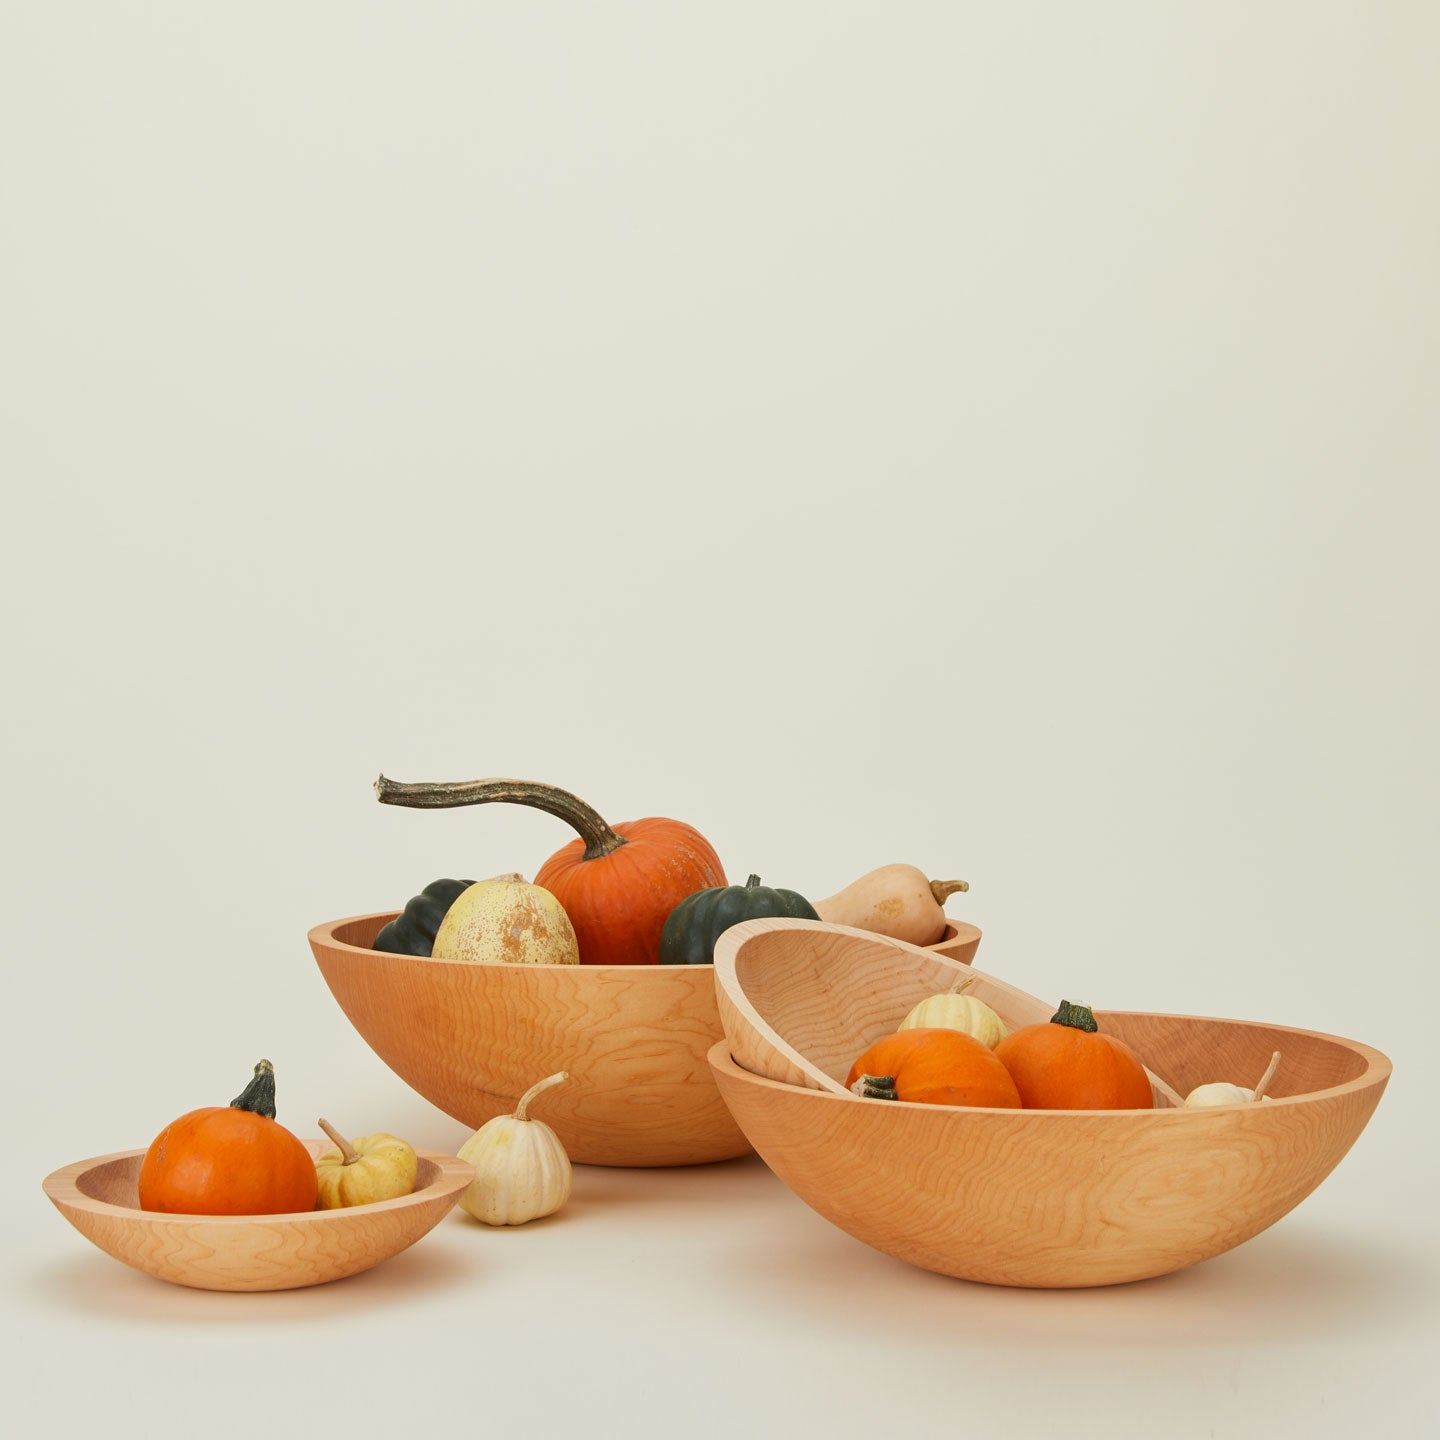 A group of maple wood bowls in four sizes, with pumpkins.